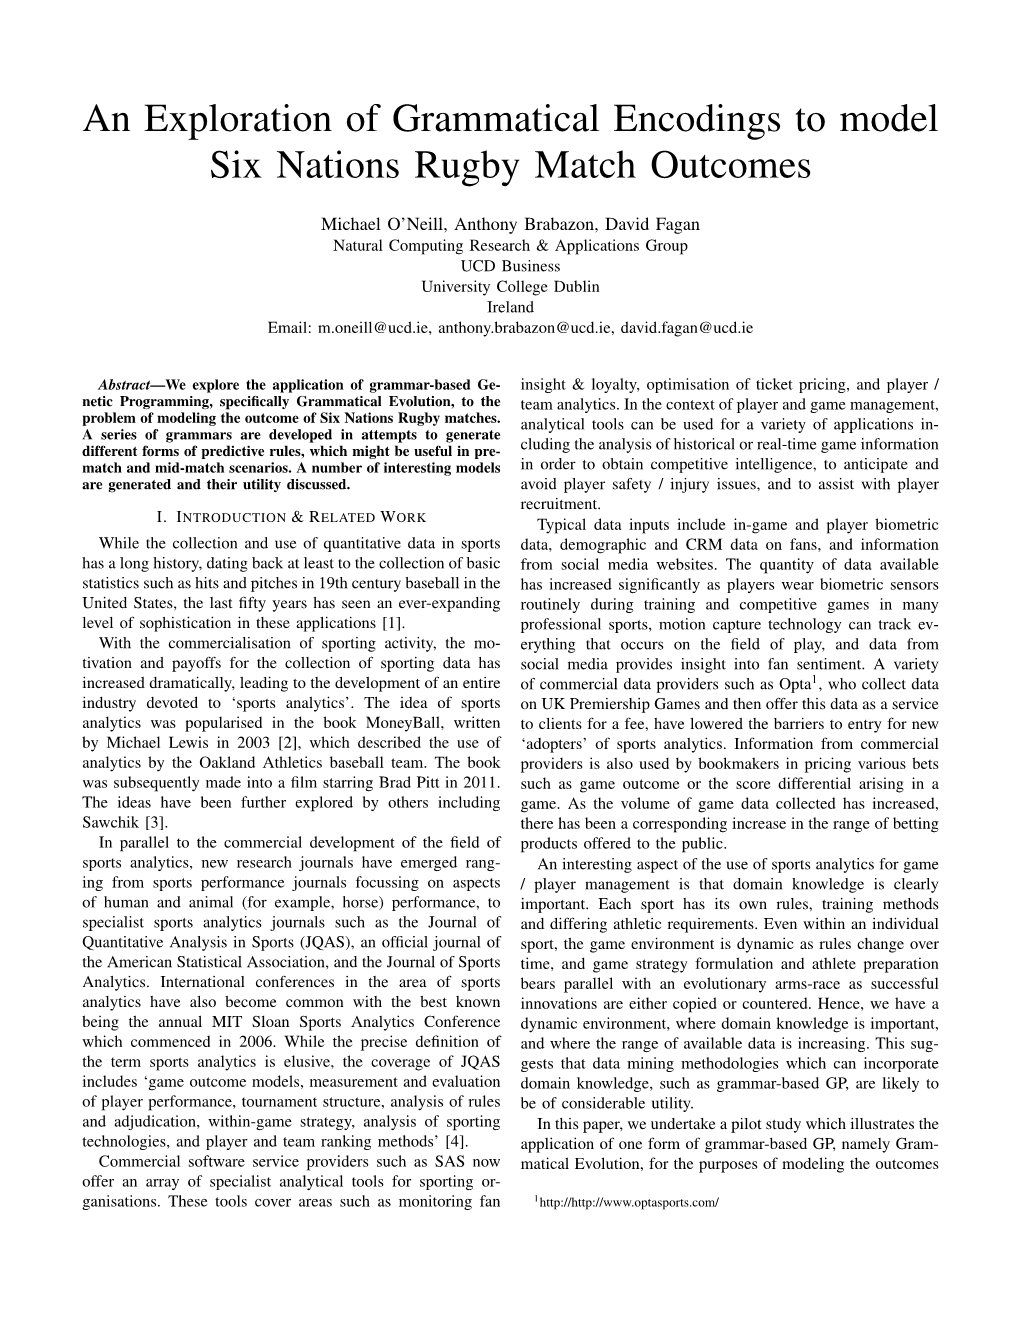 An Exploration of Grammatical Encodings to Model Six Nations Rugby Match Outcomes